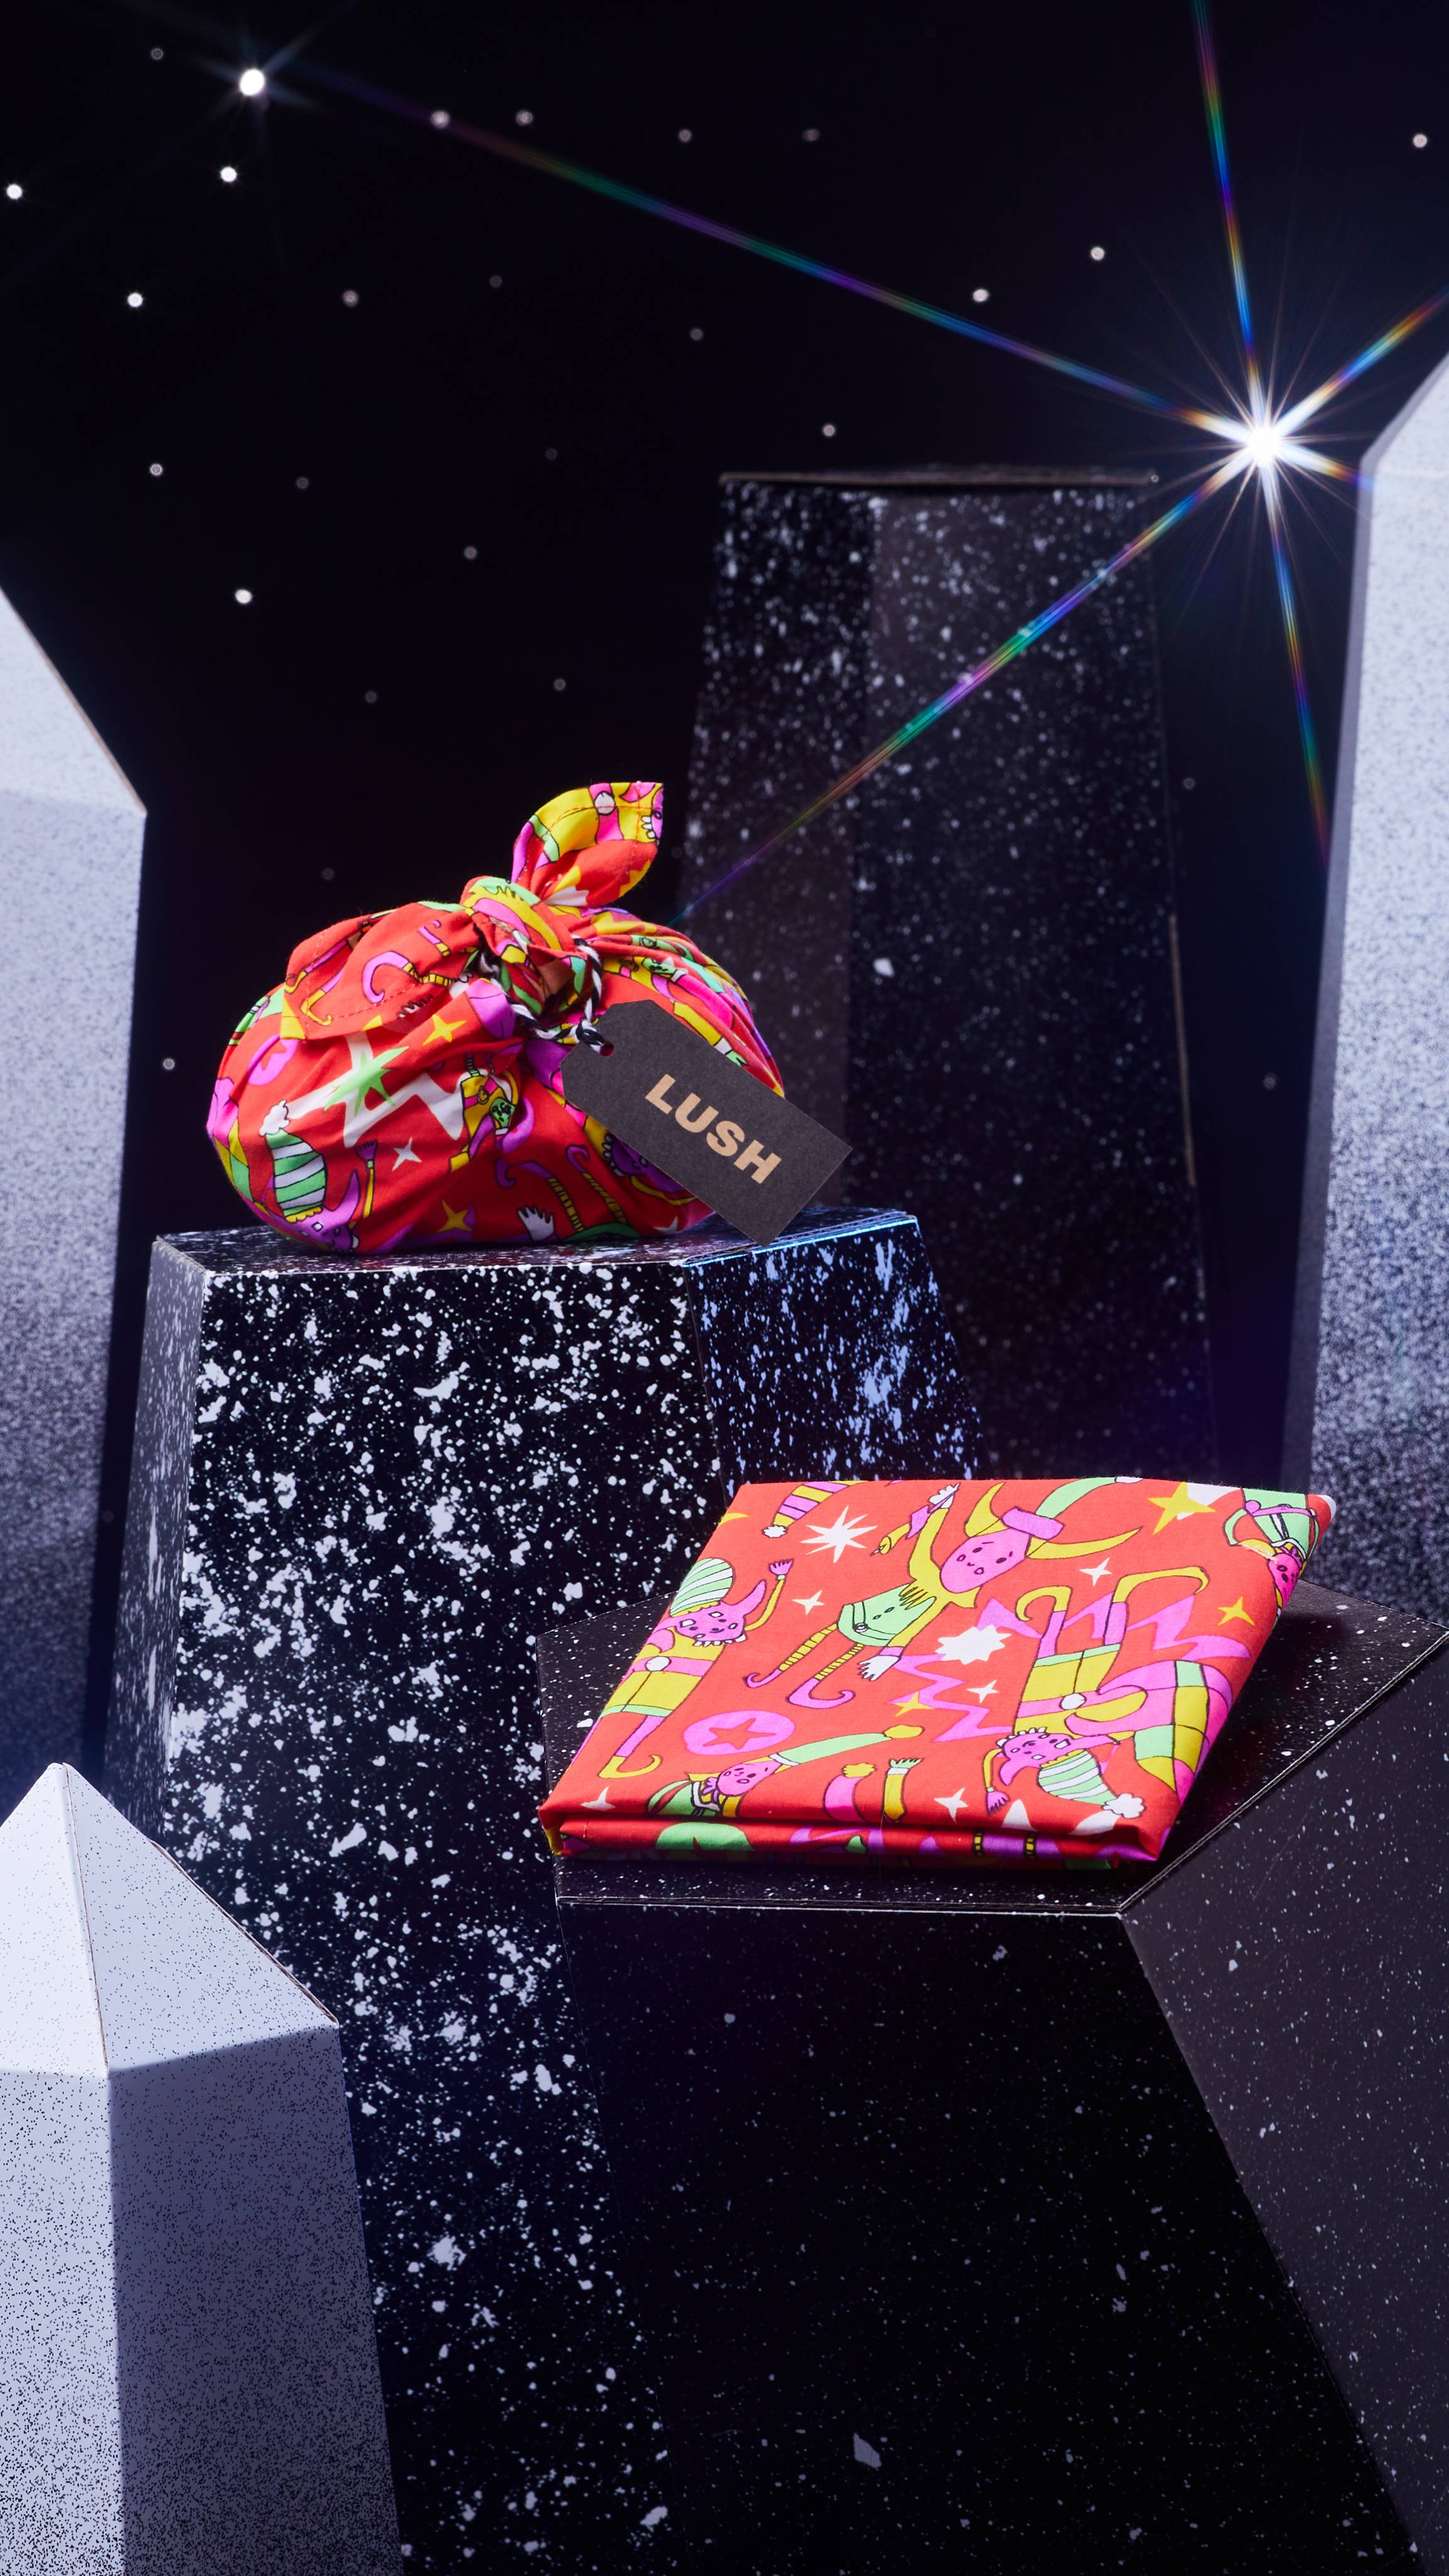 Secret Santa Knot Wrap is shown two ways: folded and wrapping a gift on a dark chromatic platform among geometric shapes.